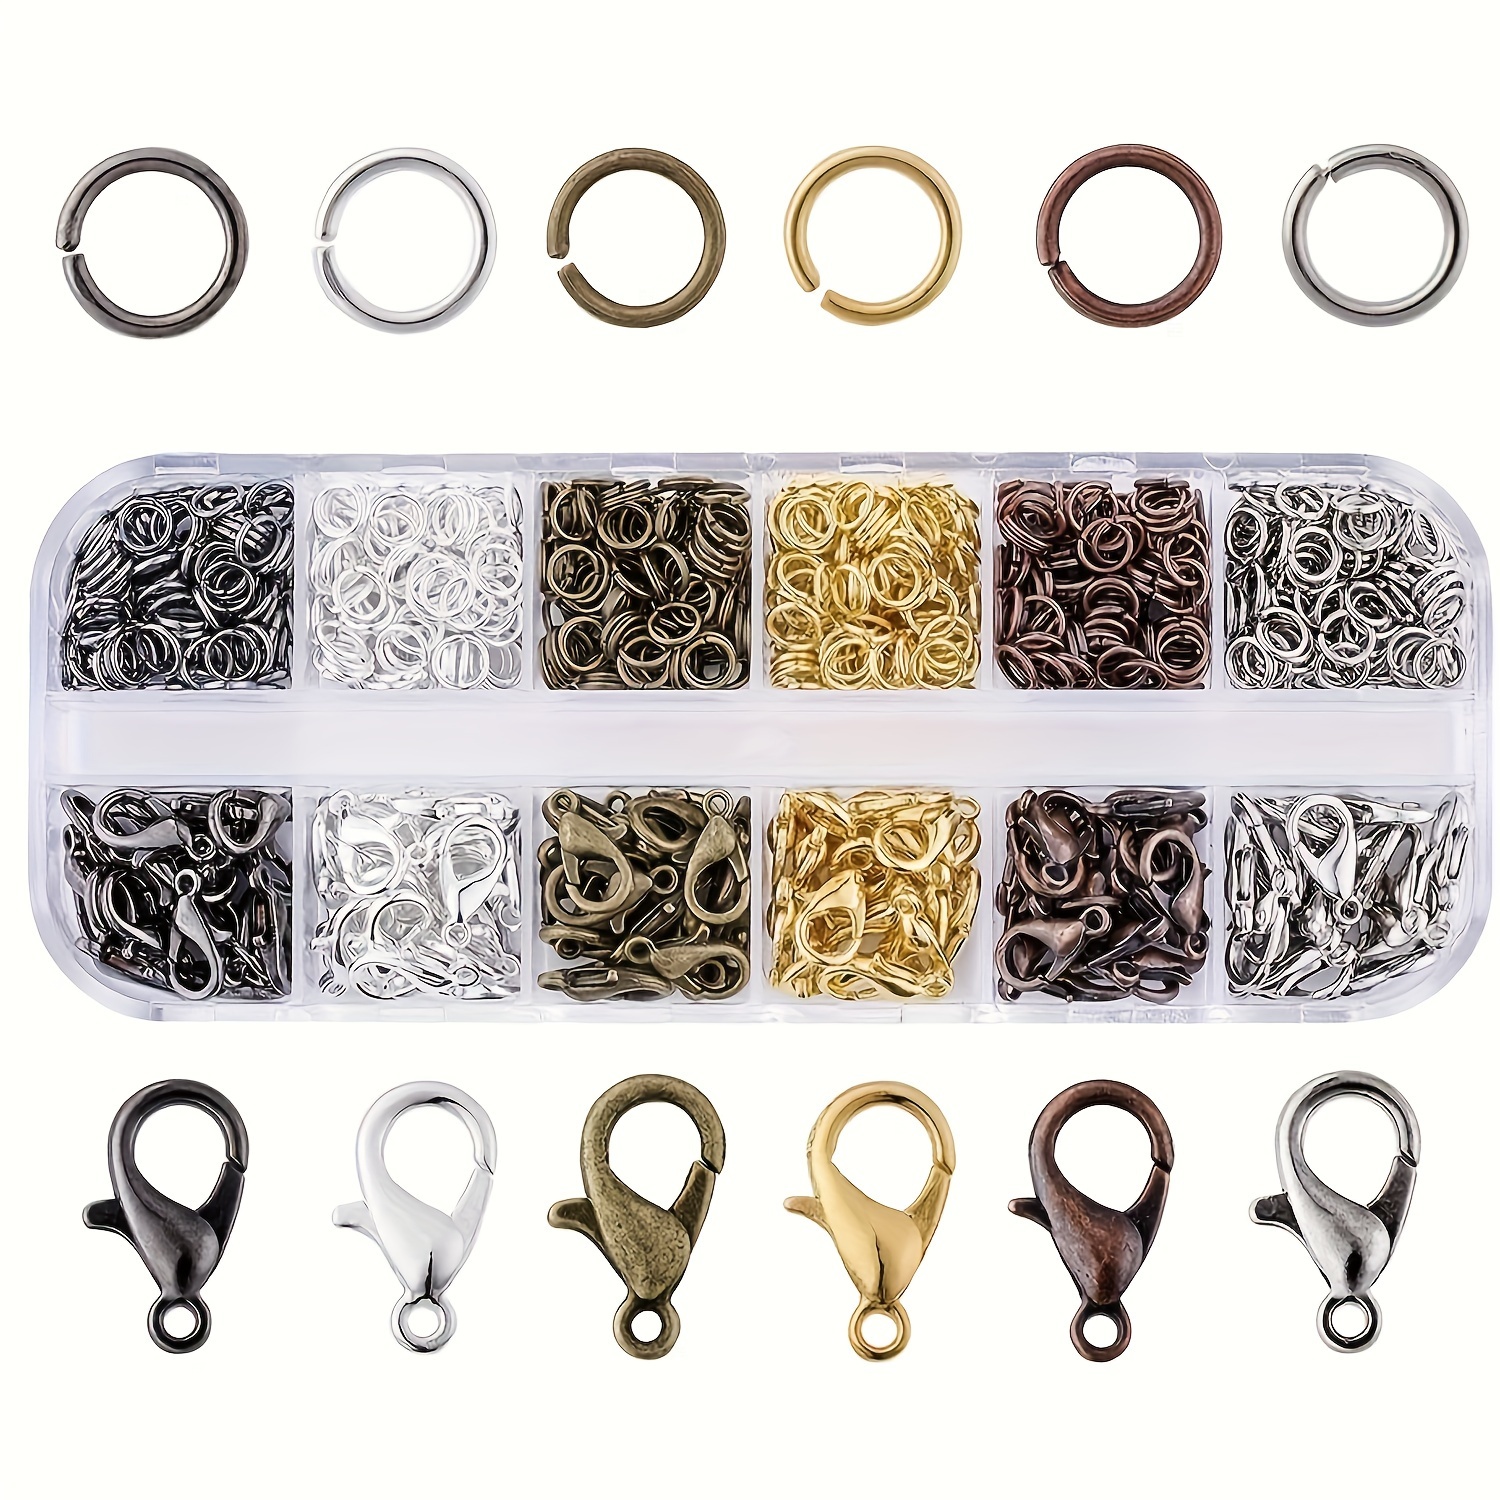 Jewelry Making Kit, 1200pcs Open Jump Rings Jewelry Repair Kit for Necklace  Bracelet, Lobster Clasps and